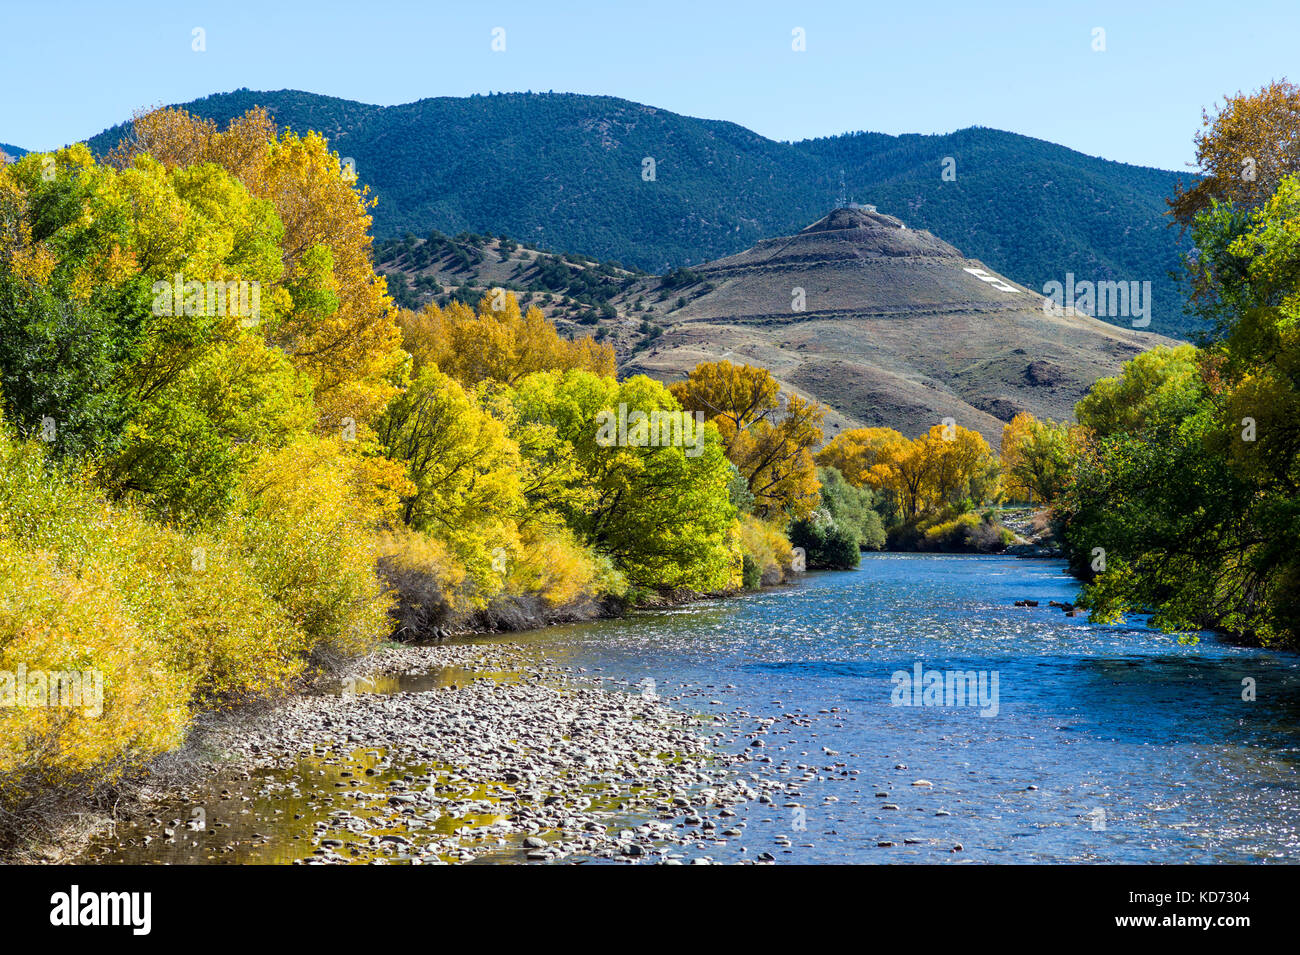 Fall foliage colors along the Arkansas RIver which runs through the downtown historic district of the small mountain town of Salida, Colorado, USA Stock Photo